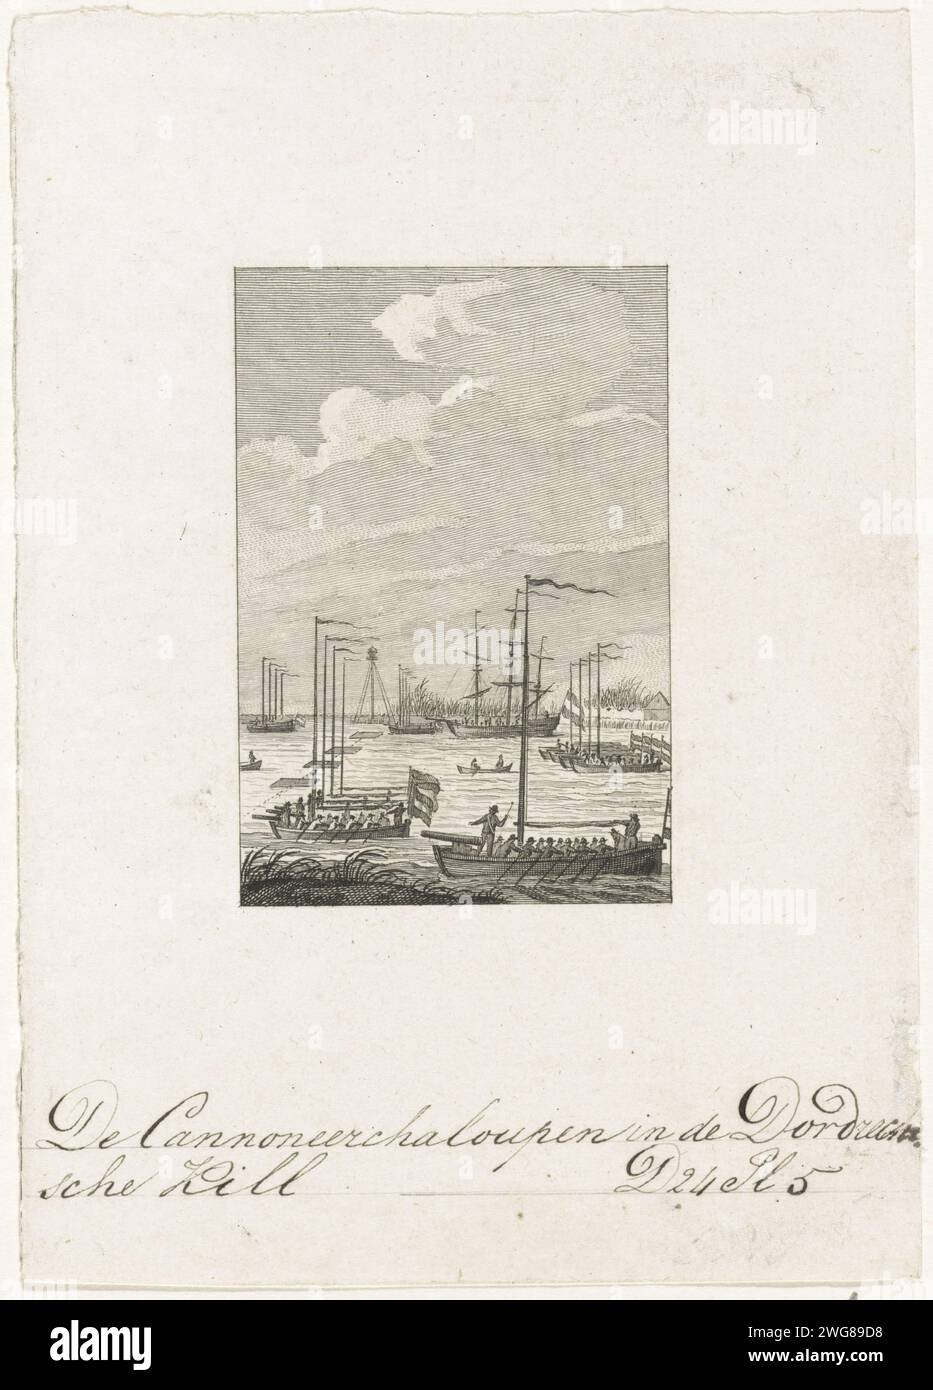 Cannoon sloops in the Dordtsche Kil, 1793, Reinier Vinkeles (I), After Jacobus Buys, After Carel Frederik Bendorp (I), After Martinus Schouman, 1793 - 1795 print The closure of the Dordtsche Kil with rafts, guns and some other vessels on March 29, 1793, as a defense against the French. With handwritten inscription. Northern Netherlands paper etching rowing-boat, canoe, etc.. chains across waterway Dordtse Kil Stock Photo